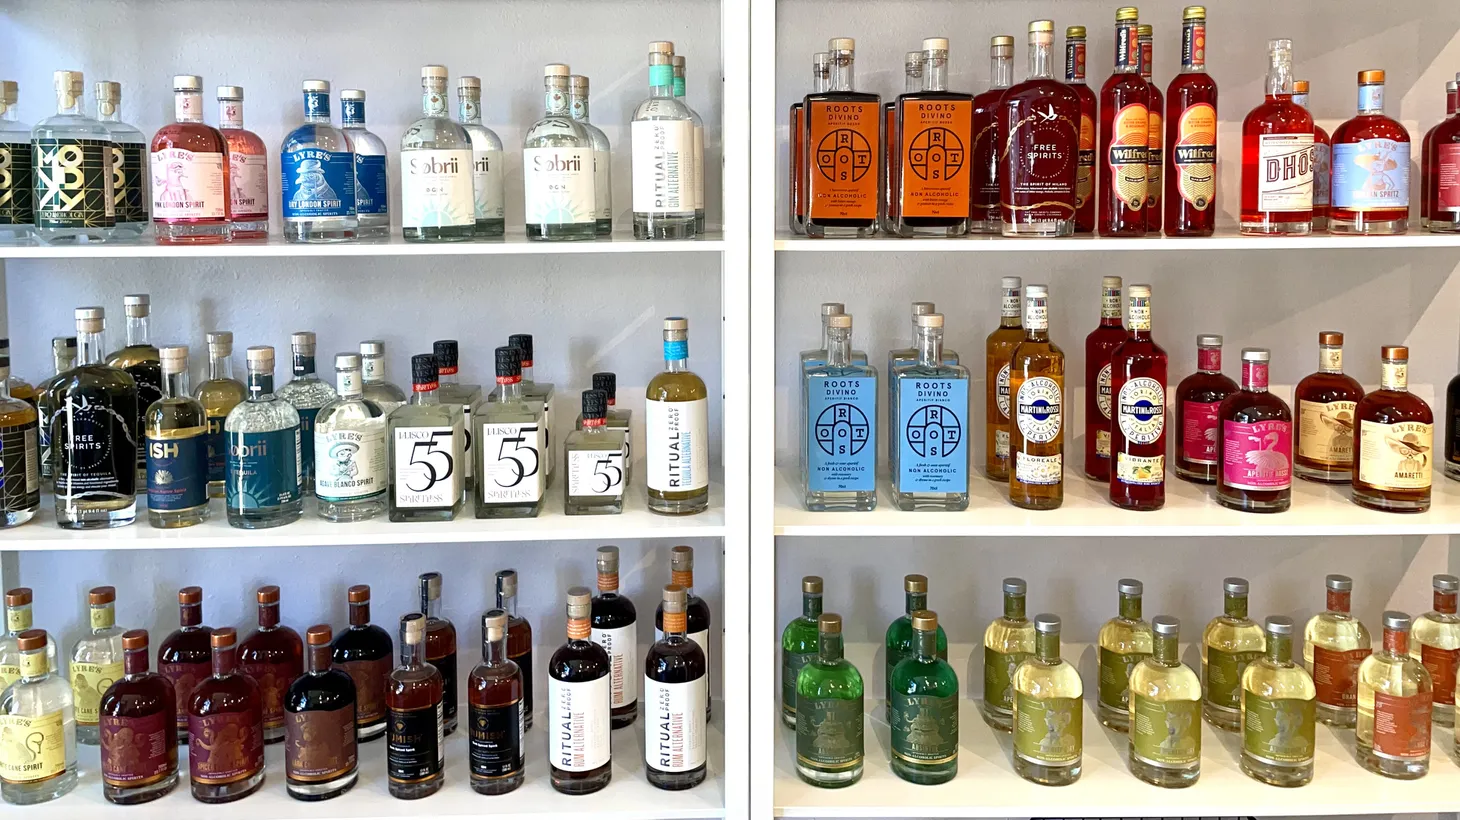 Lots of bottles, no booze. Non-alcoholic bottle shop Soft Spirits in Silver Lake offers a variety of distilled liquors that are ethanol-free.